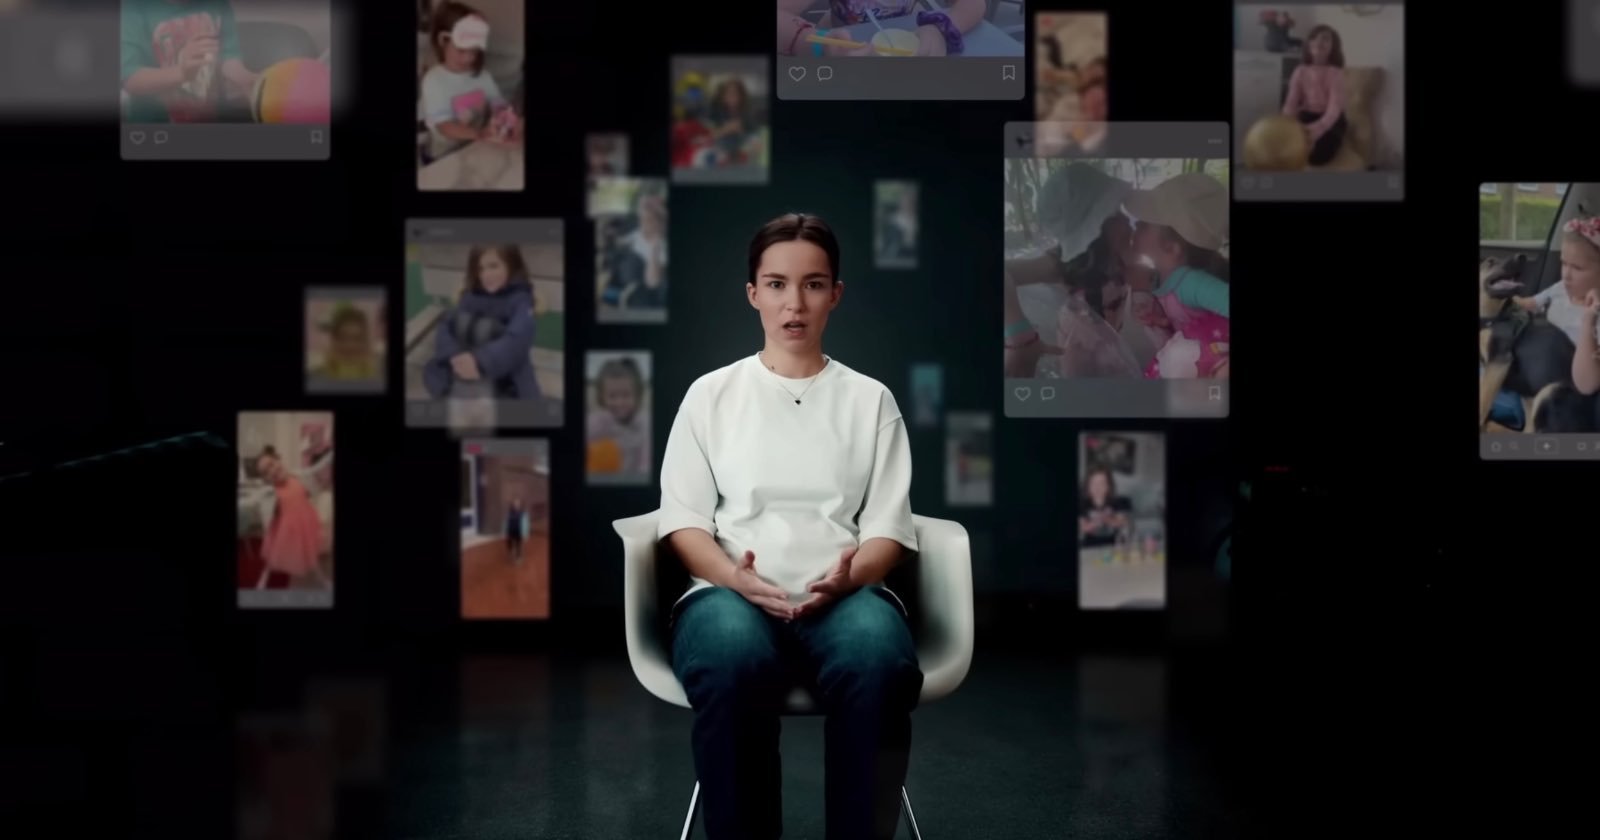 Terrifying ad shows how a child's image can be manipulated and deepfaked by AI.